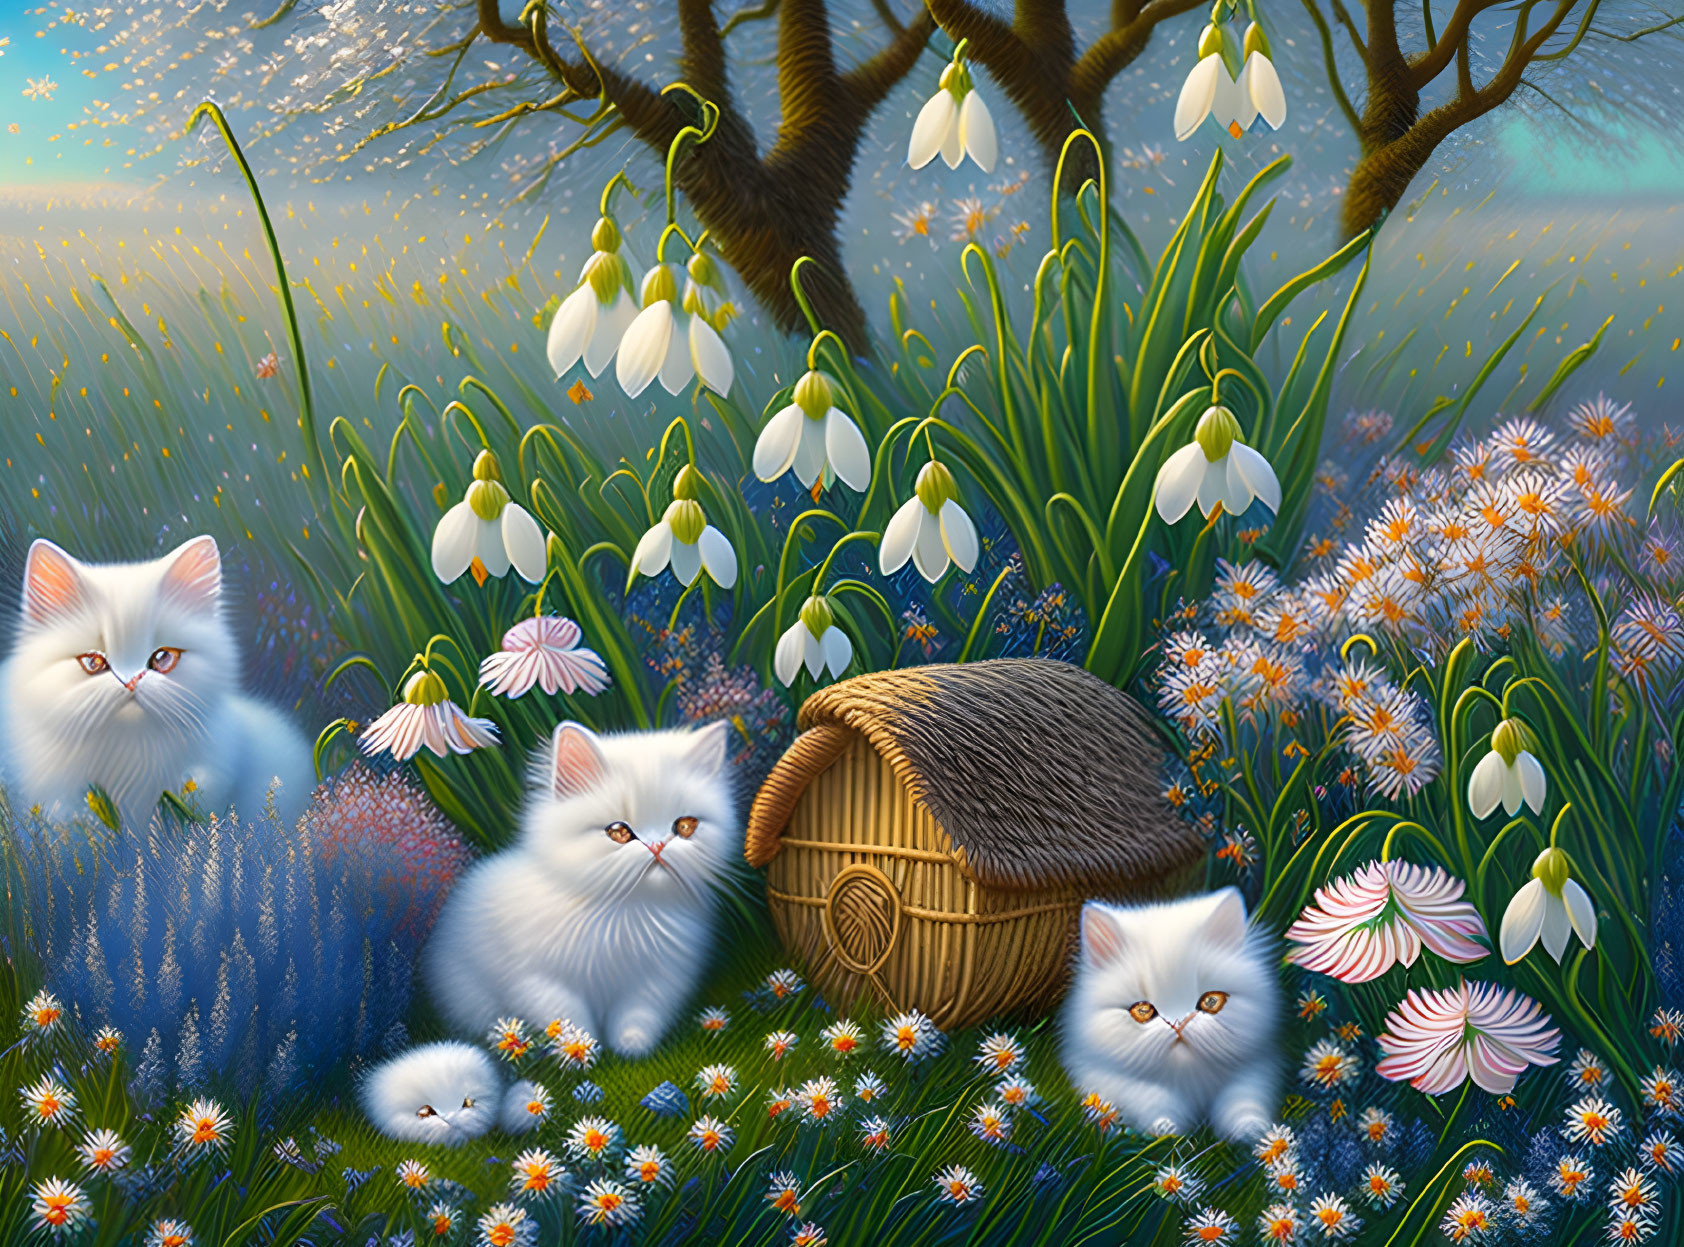 White Fluffy Cats with Woven Basket in Colorful Garden